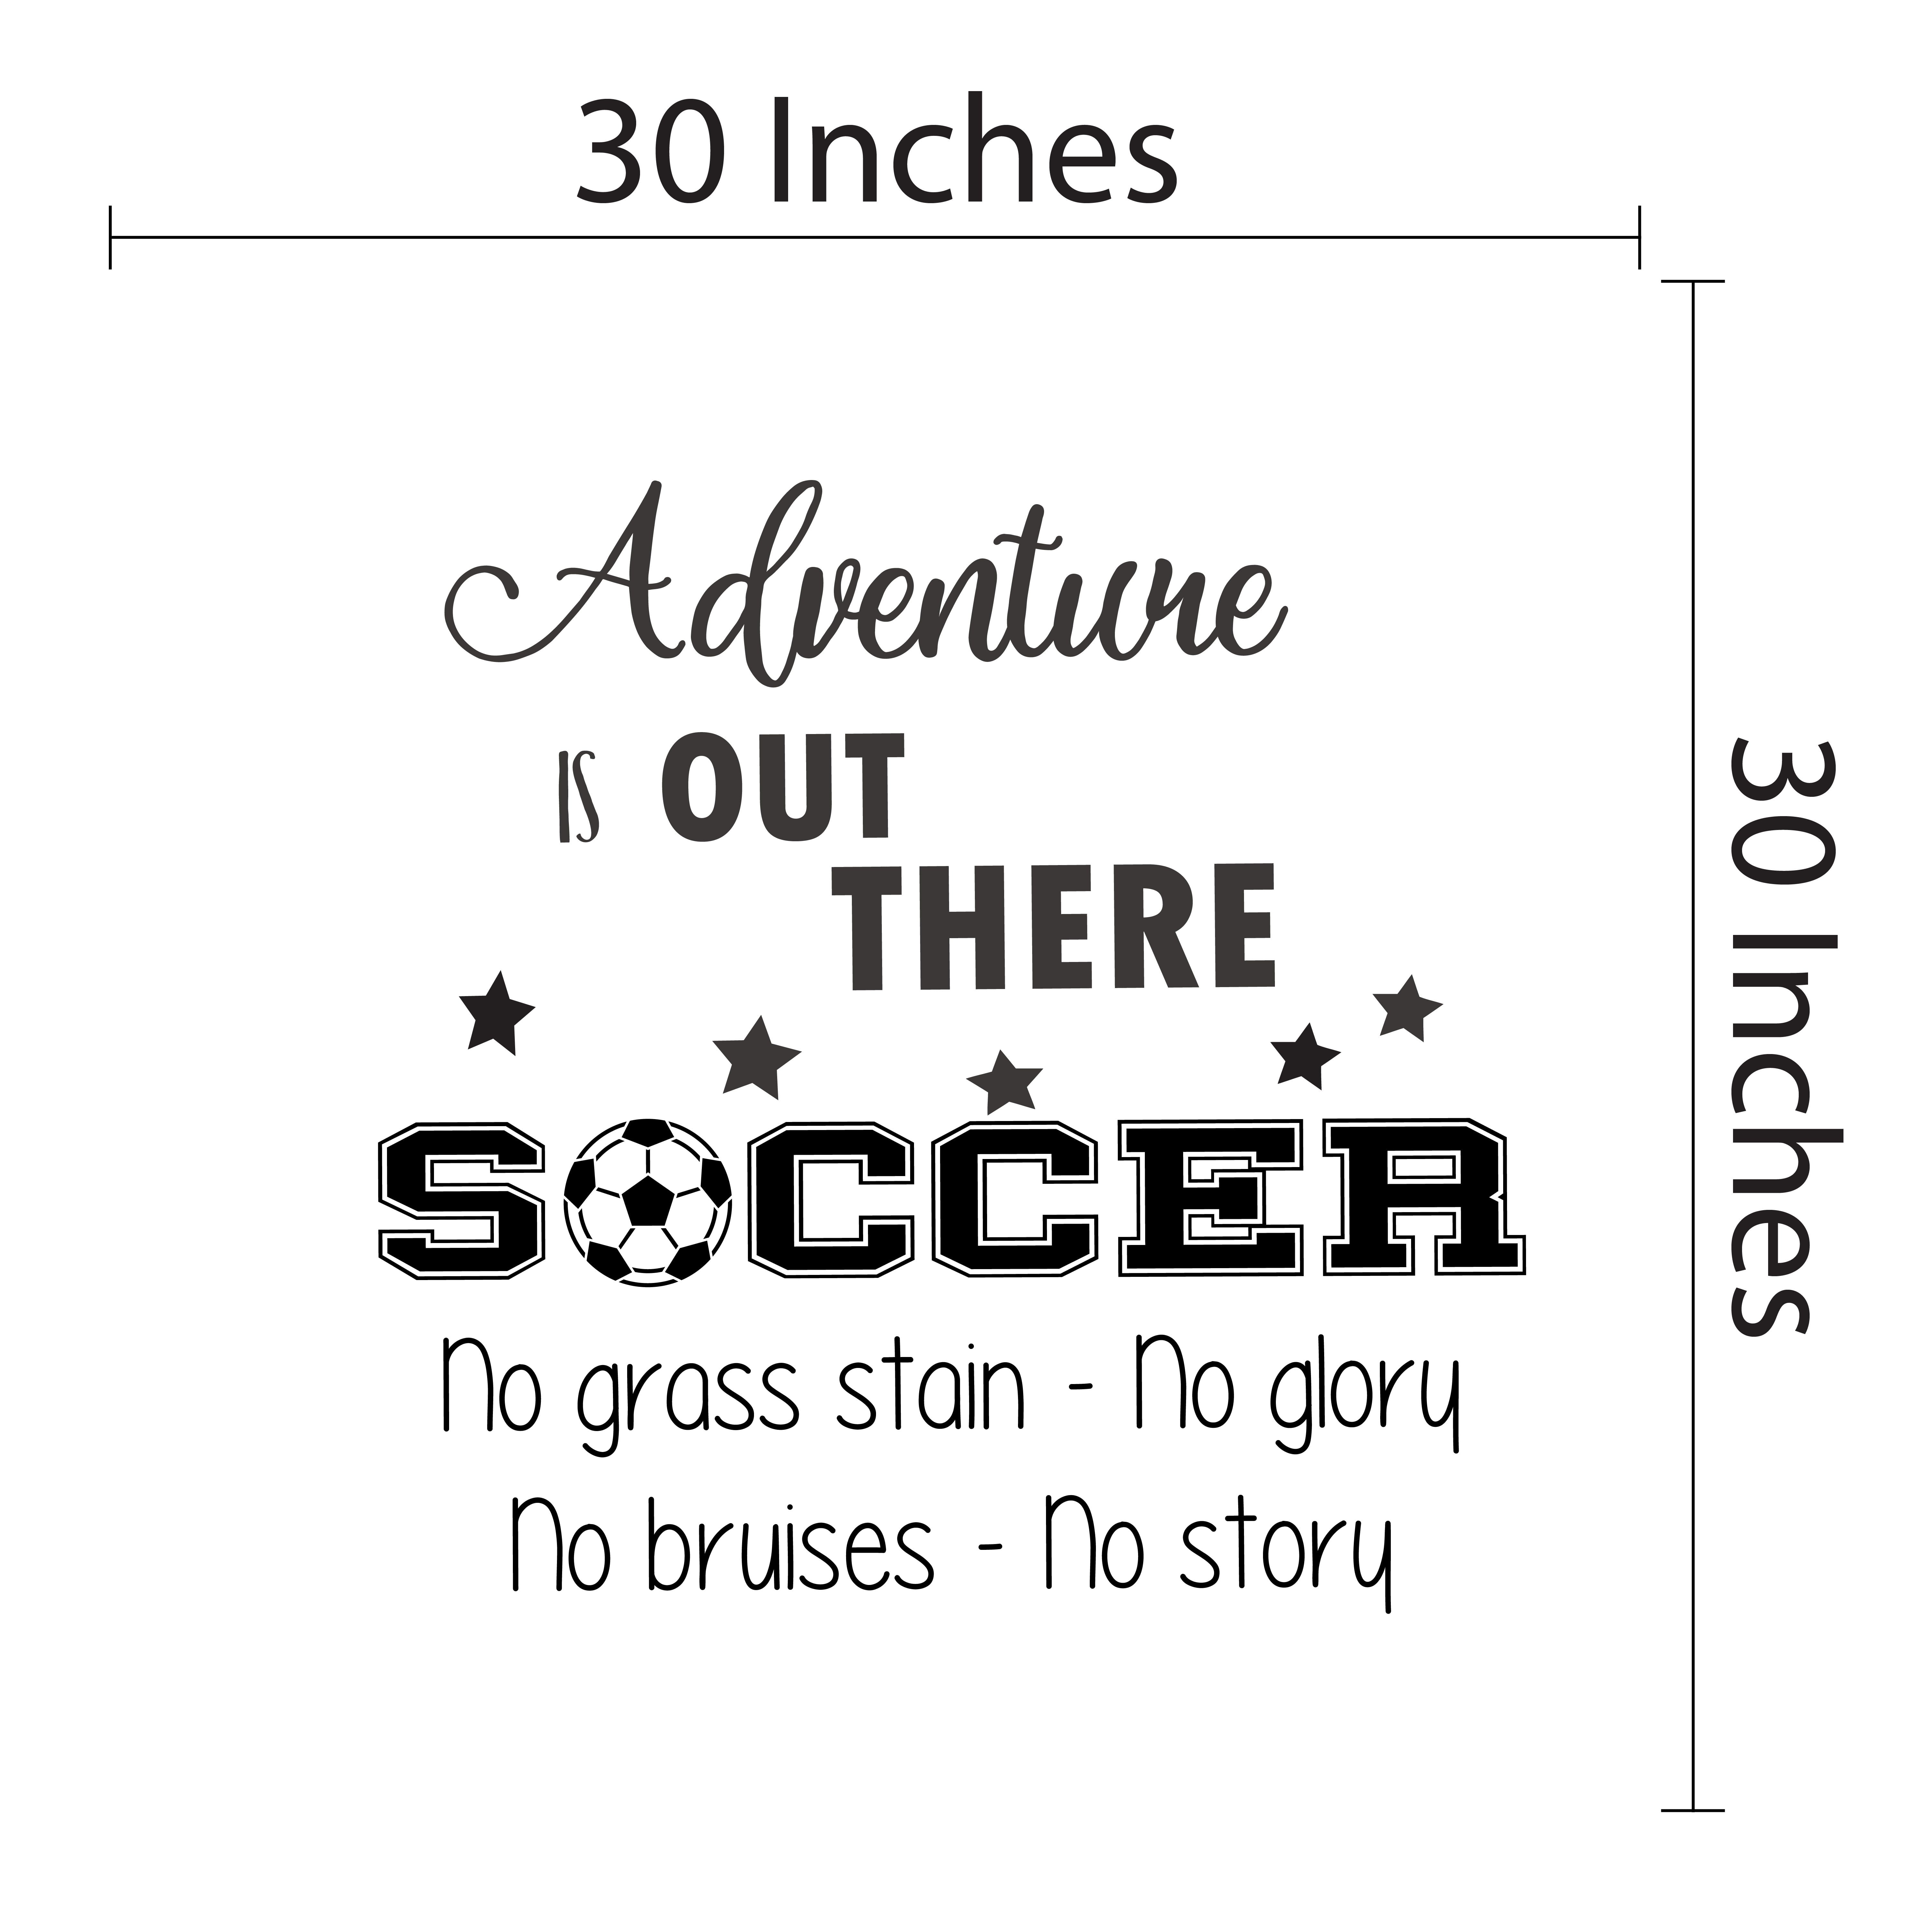 Soccer Adhesive Vinyl Inspirational Soccer Quotes Lettering Art Decoration Soccer Ball Stars Design Easy To Apply Home Kids Bedroom Wall Decal Sticker 10 X 10 Walmart Com